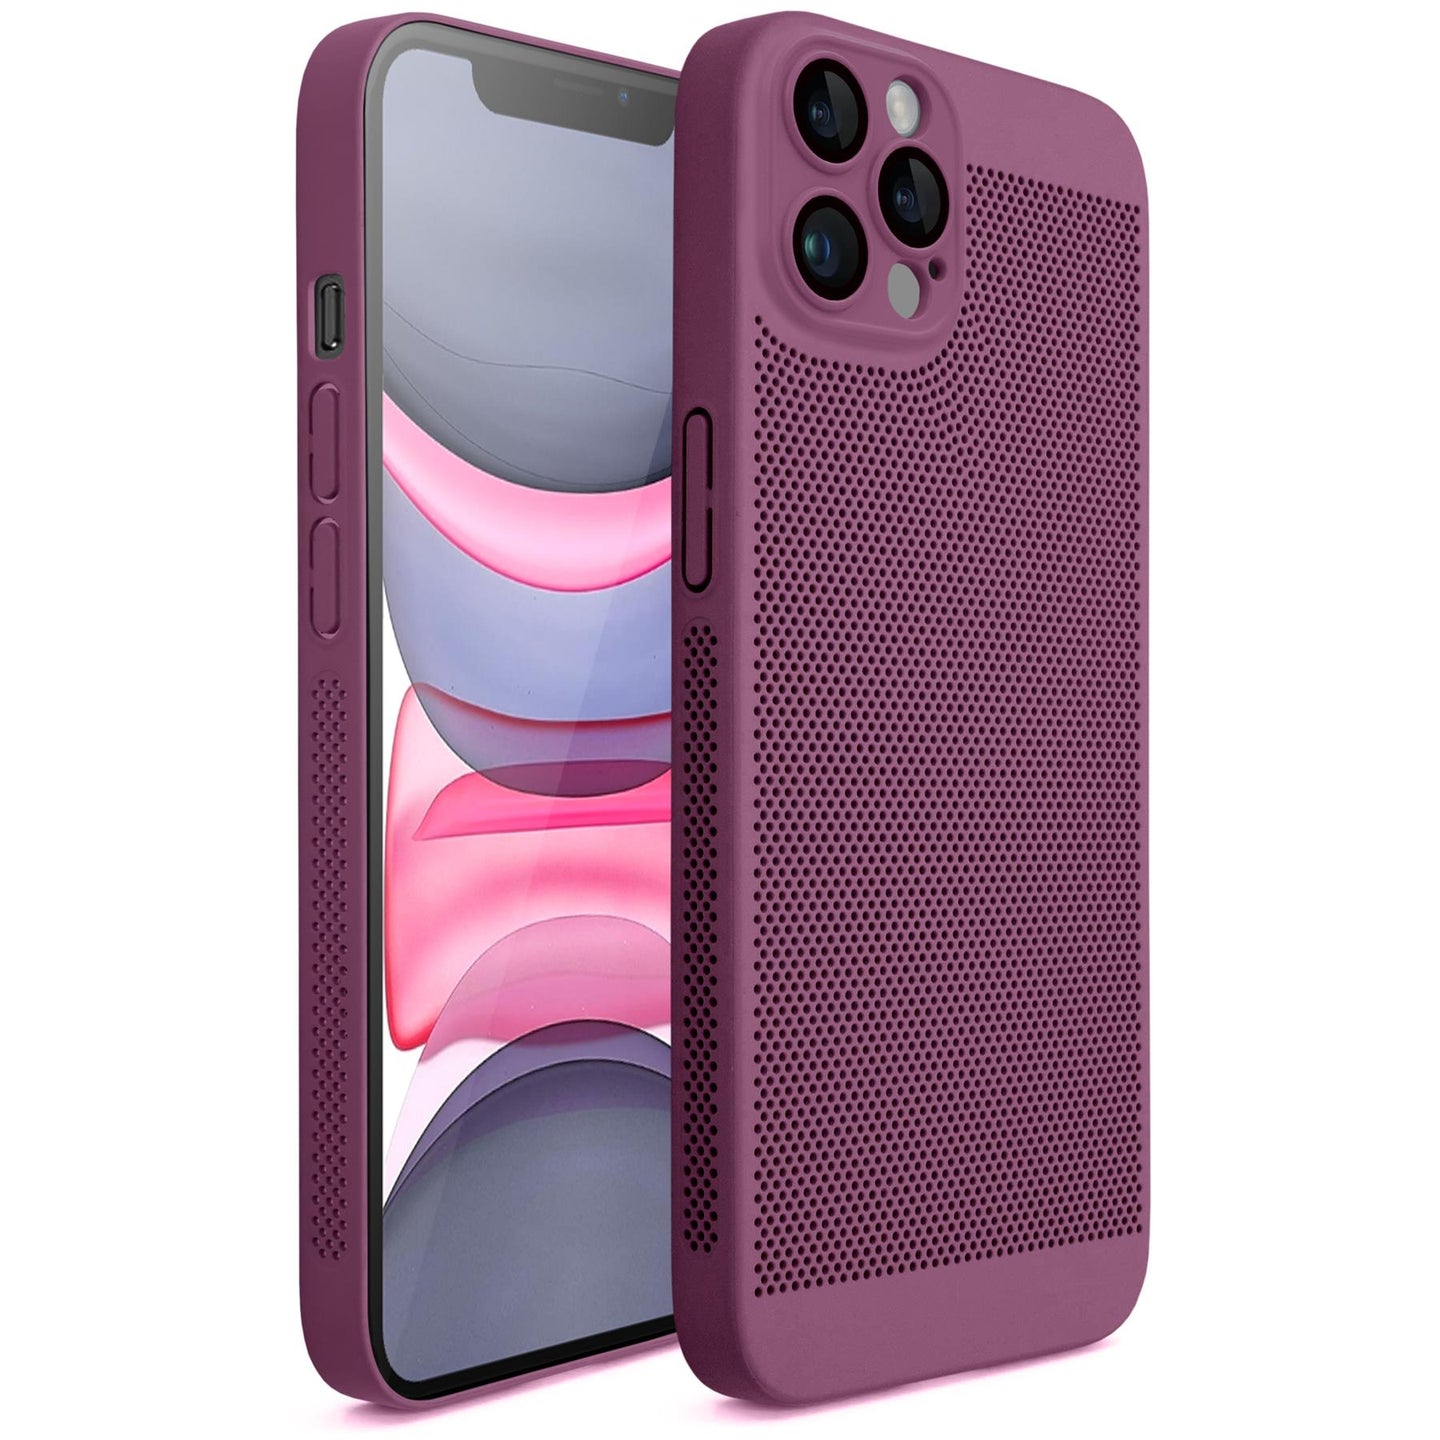 Moozy VentiGuard Phone Case for iPhone 12 Pro, Purple, 6.1-inch - Breathable Cover with Perforated Pattern for Air Circulation, Ventilation, Anti-Overheating Phone Case